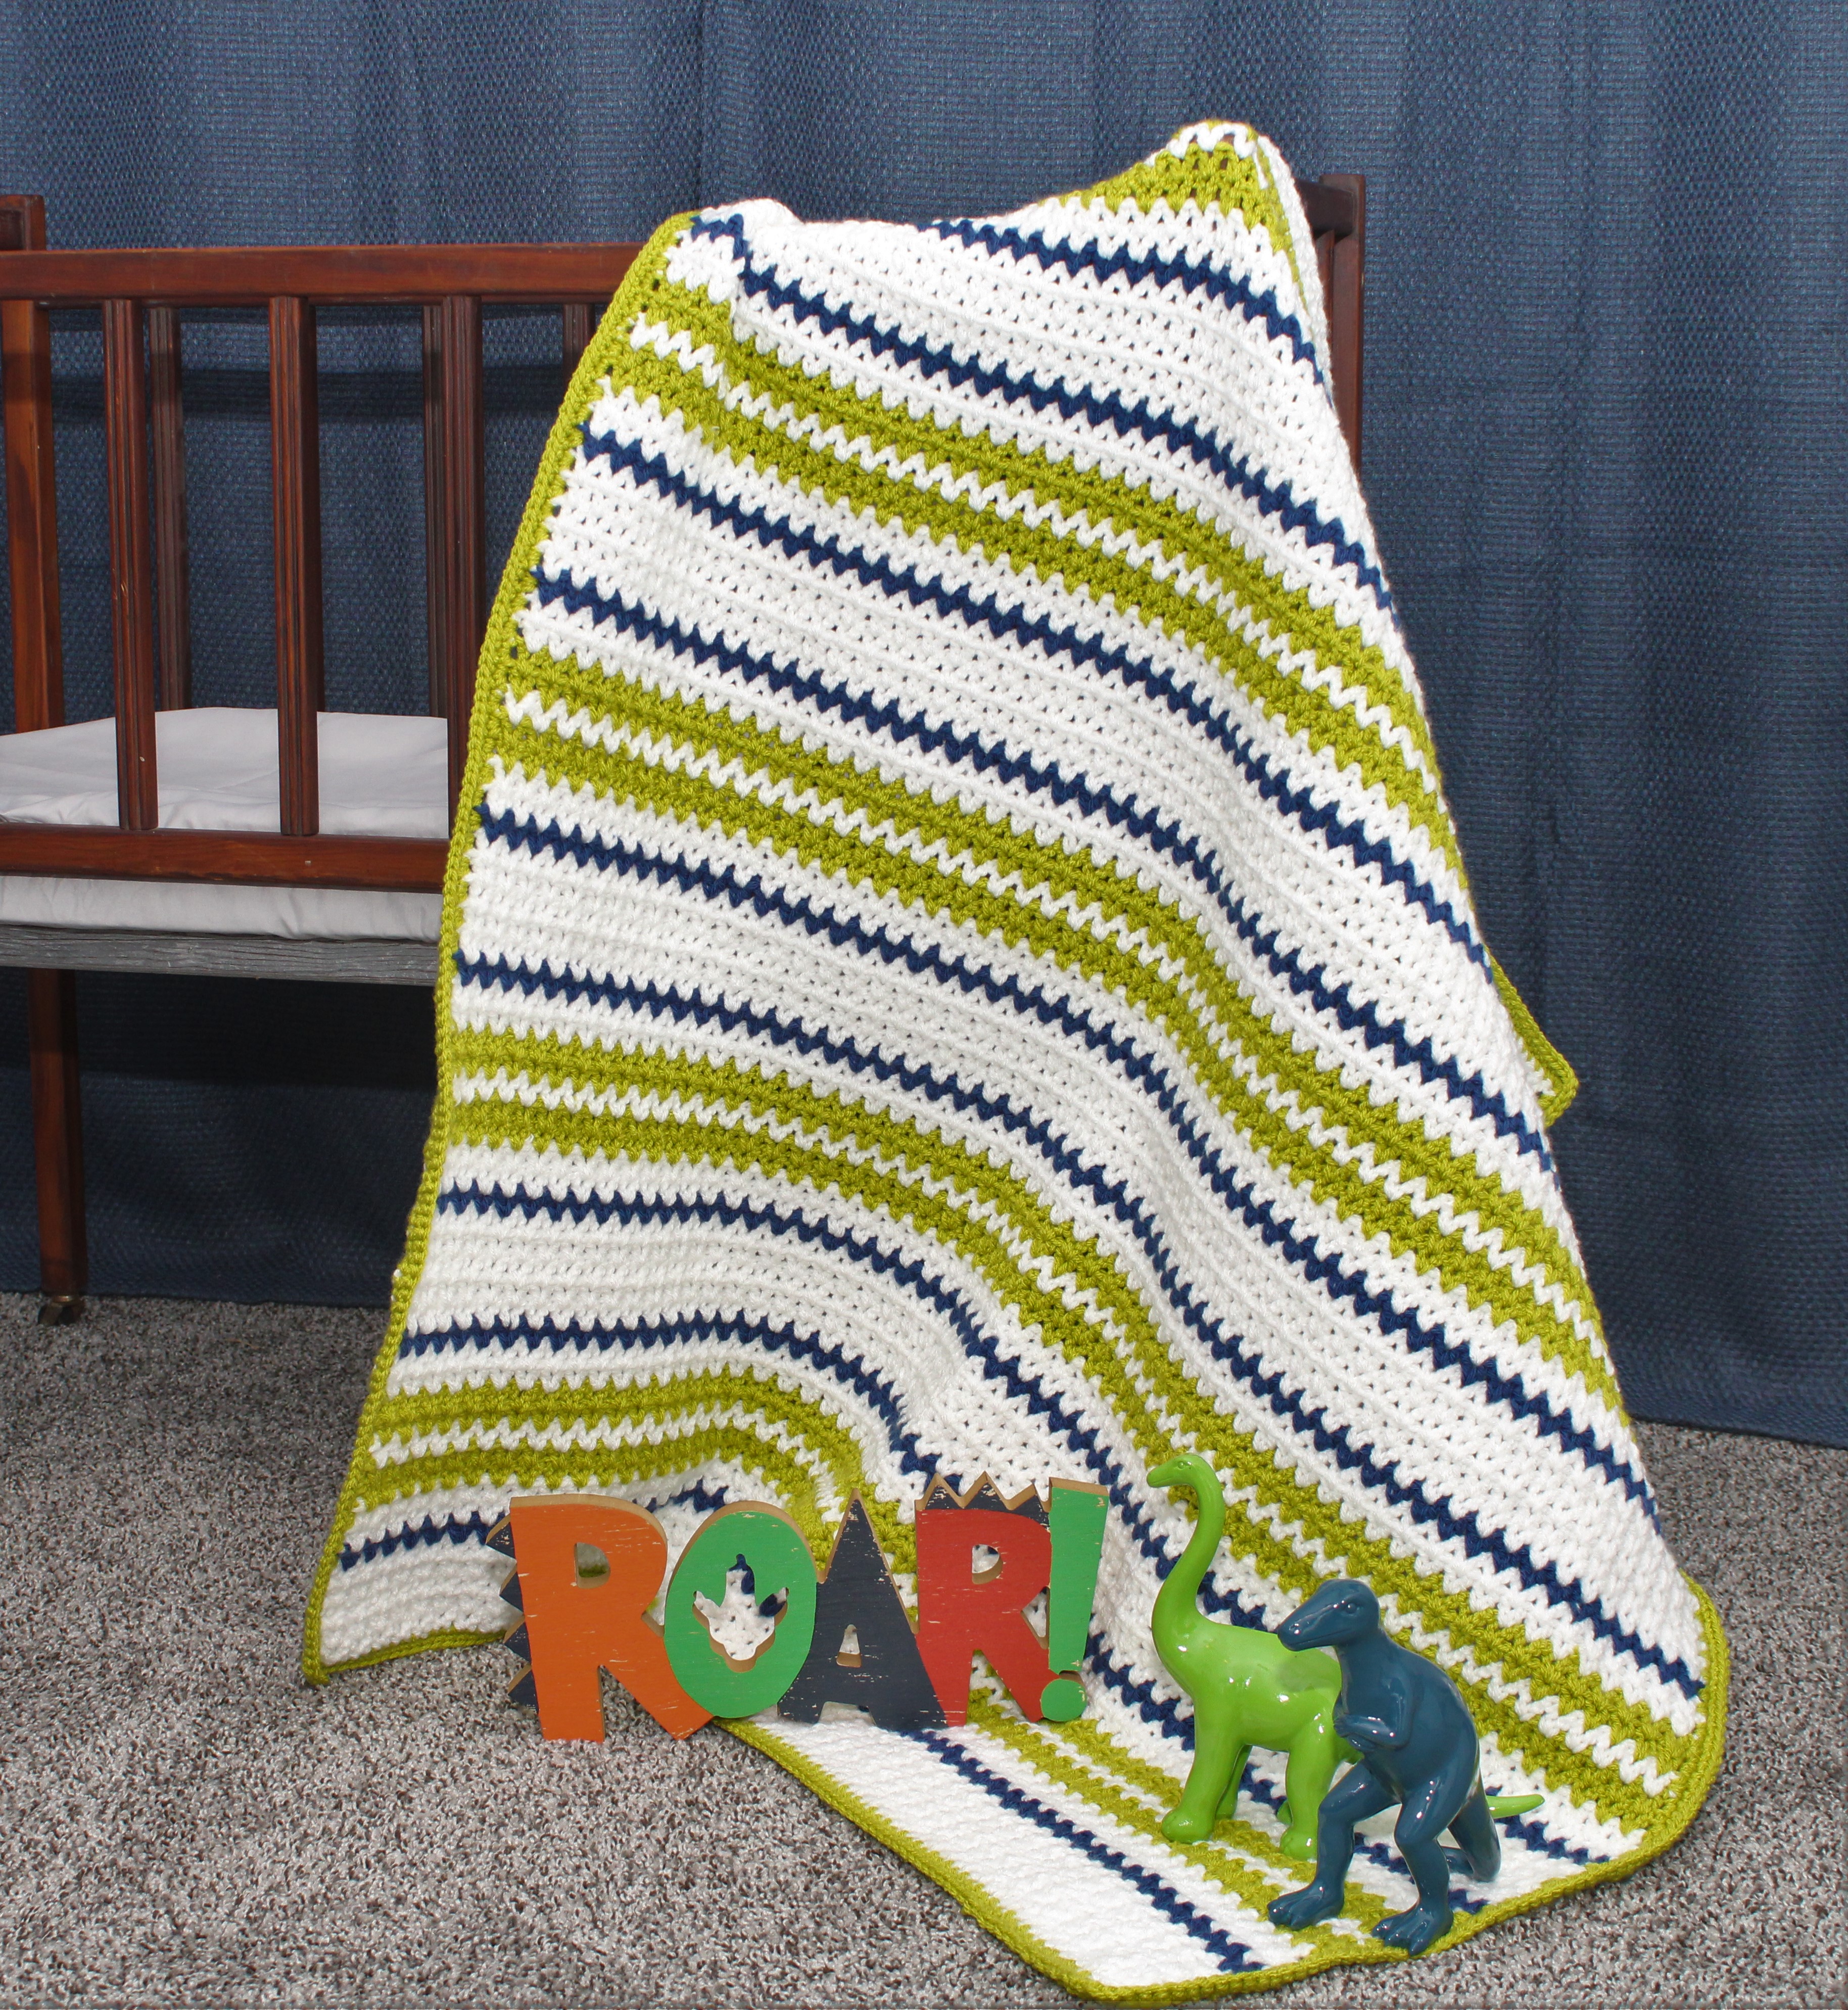 white gren and blue baby afghan draped over a crib with blue and green dinosaurs on the edge with the word roar!